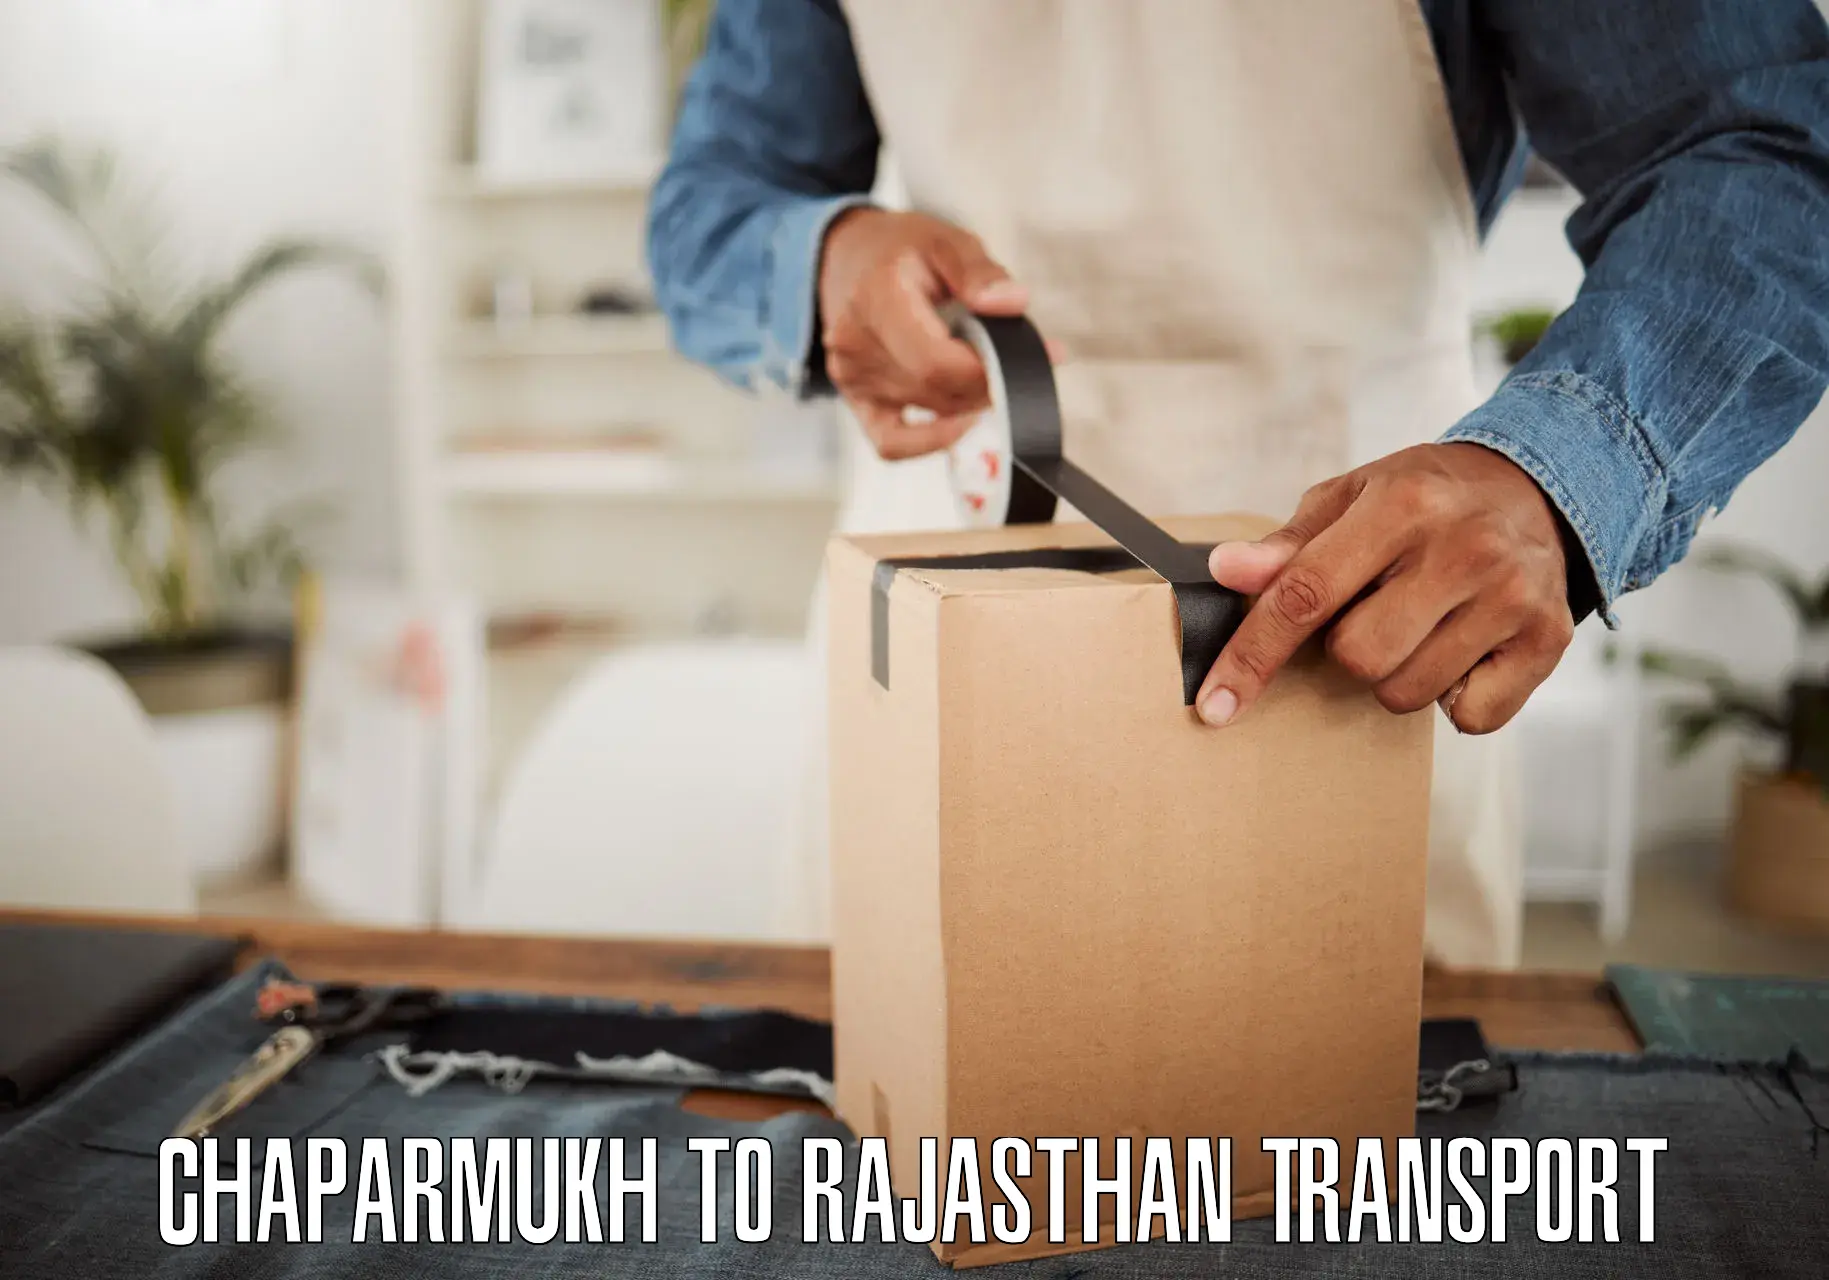 Road transport services Chaparmukh to Dausa